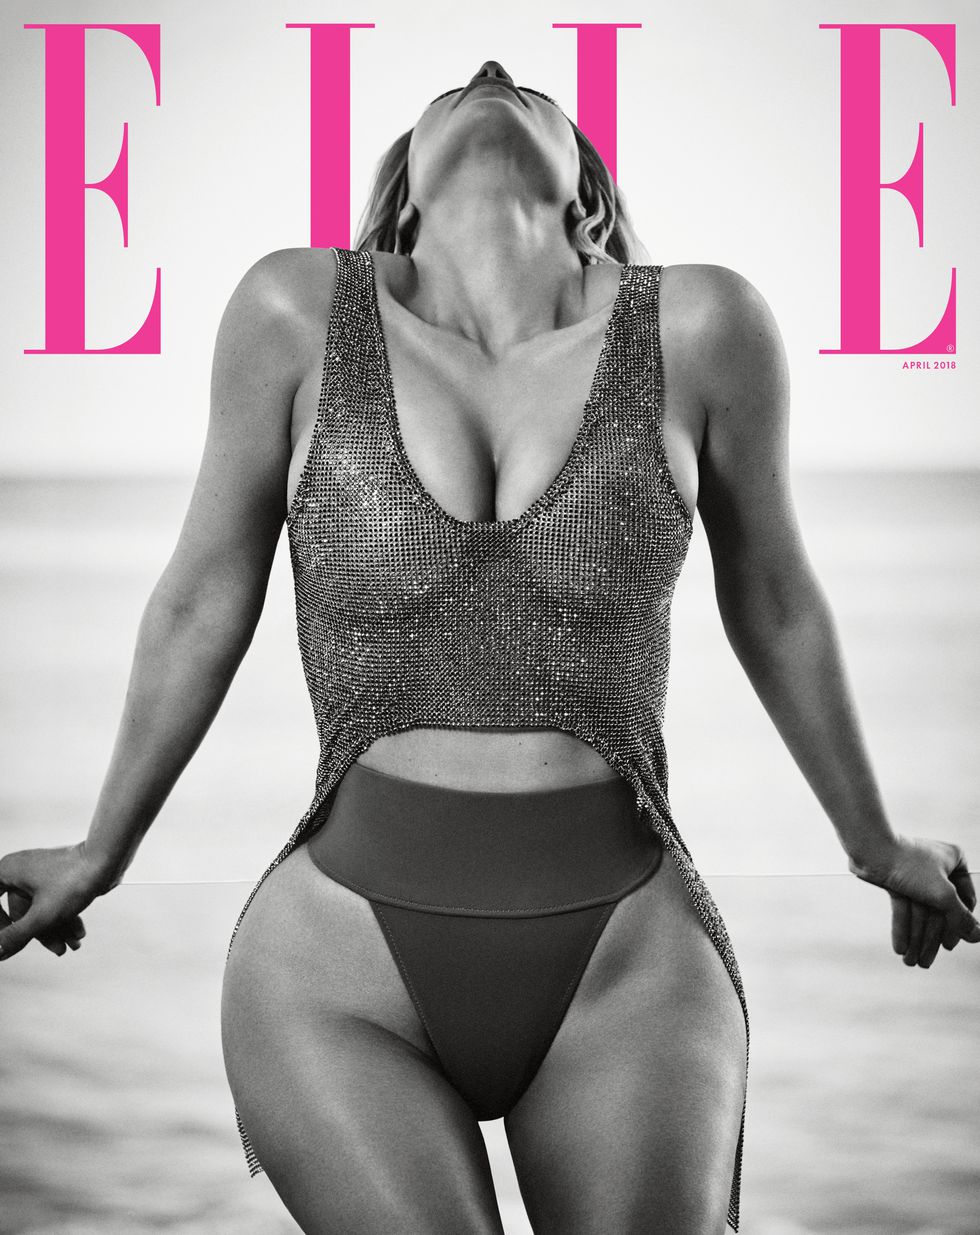 Kim Kardashian sultry on the cover of Elle Magazine